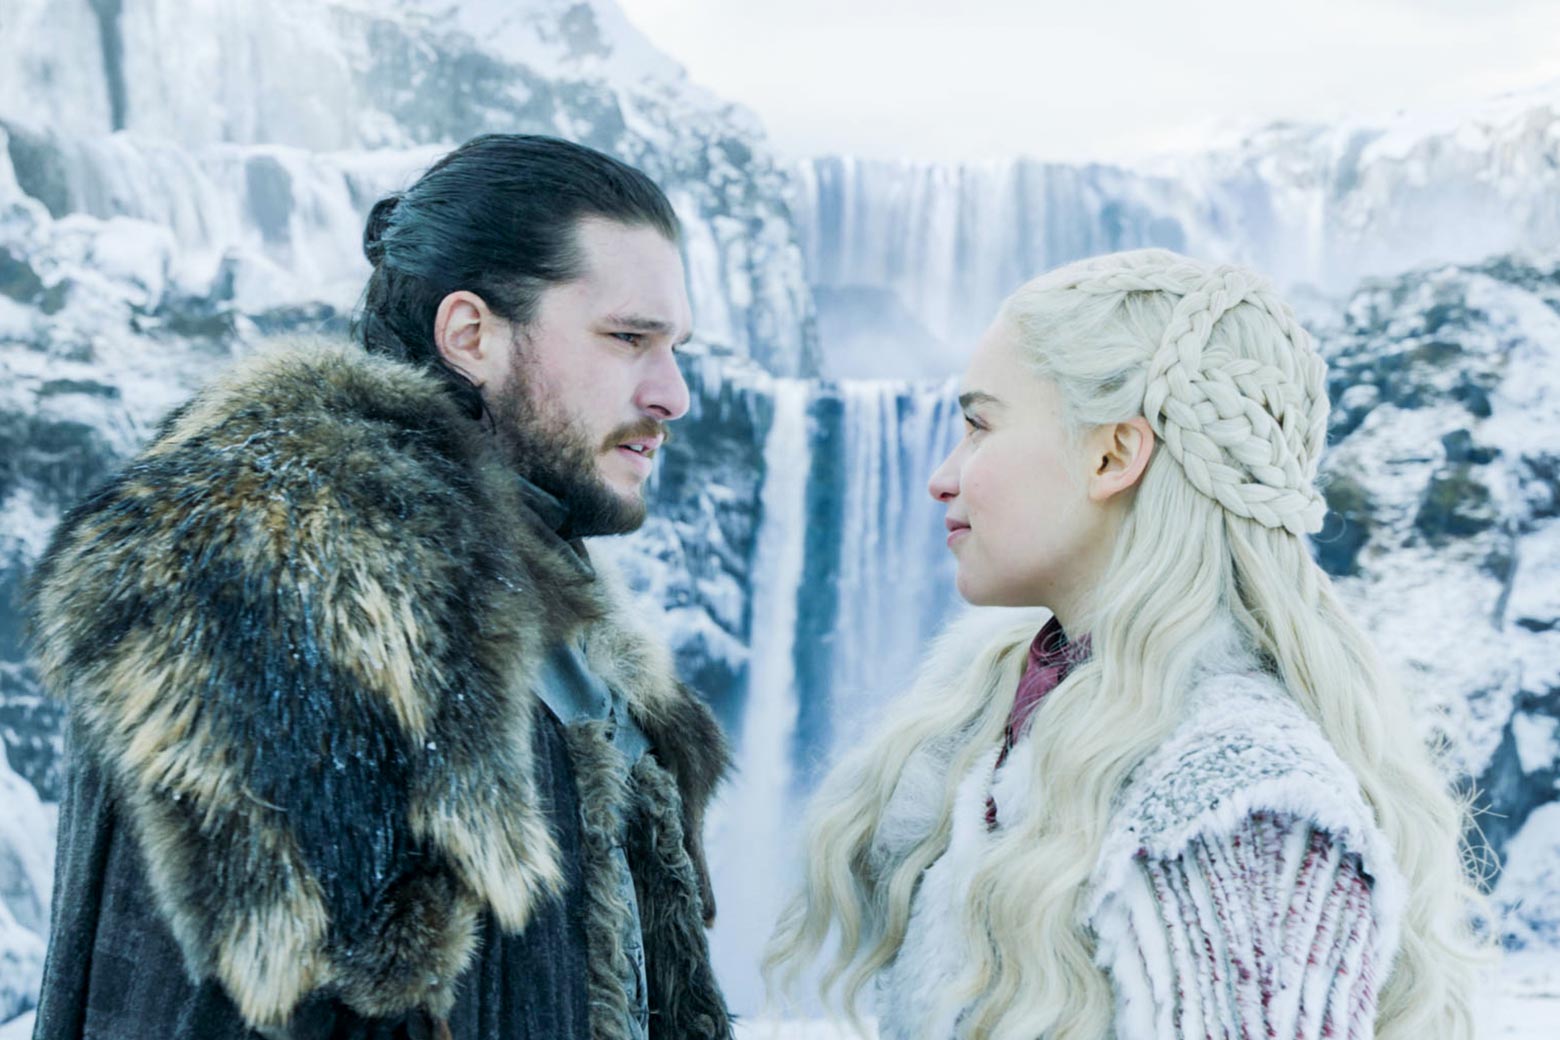 Force Sex With Niece - Game of Thrones: How bad is it to marry your aunt, as Jon Snow might do?